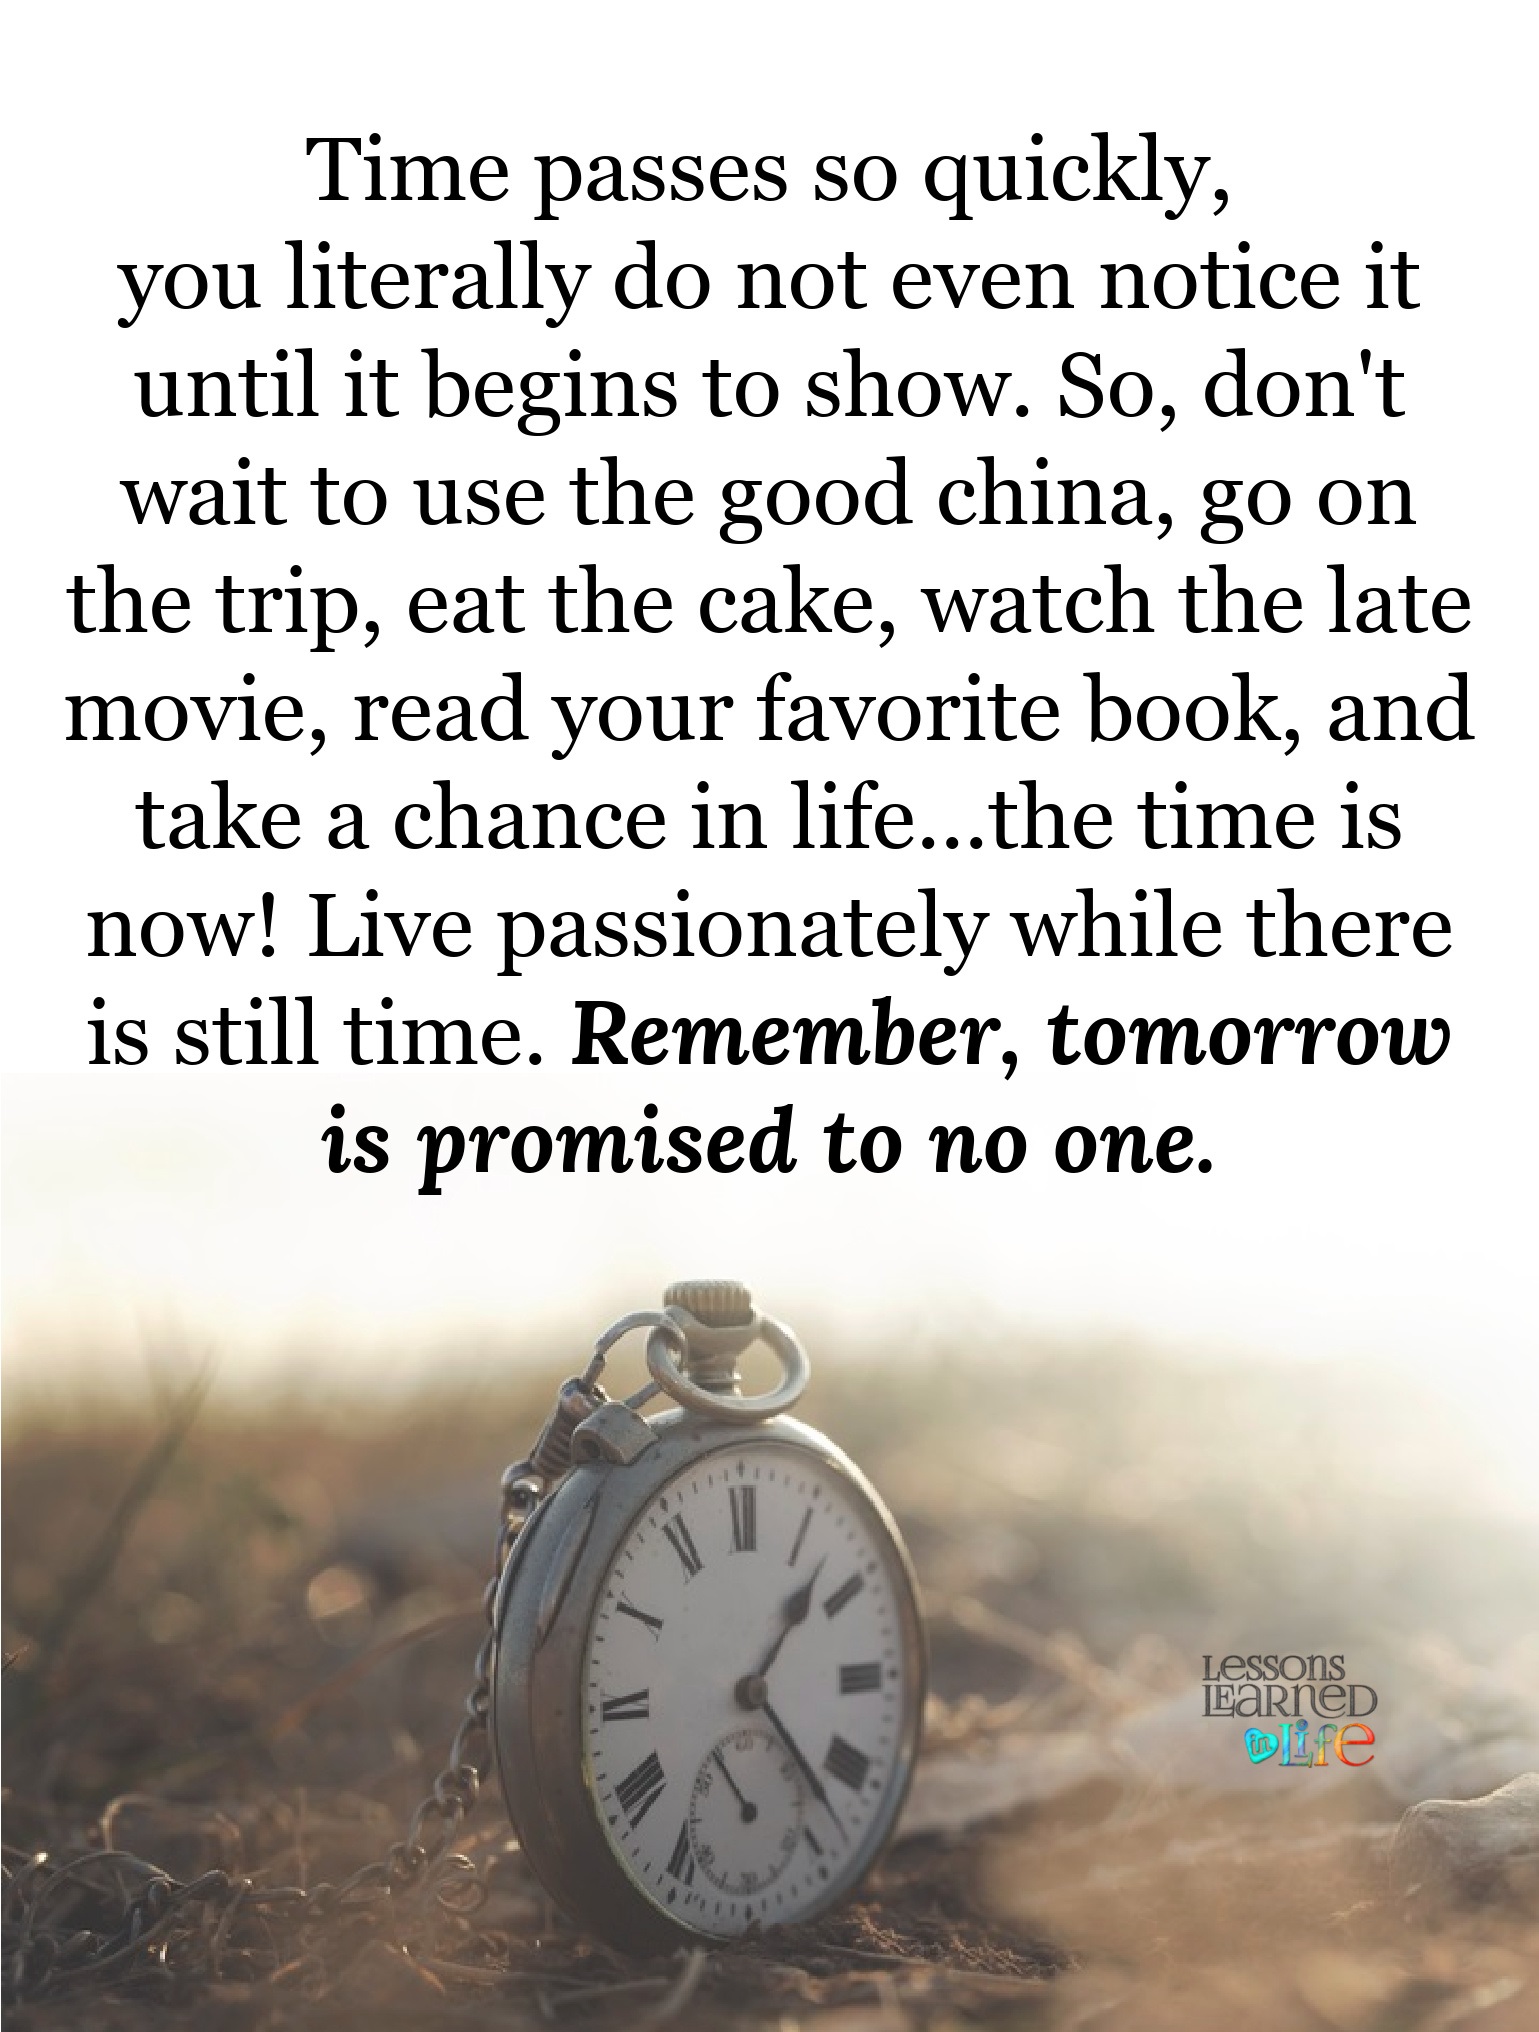 Time passes quickly, you literally do not even notice it until it begins to show. So, don’t wait to use the good china, go on the trip, eat the cake